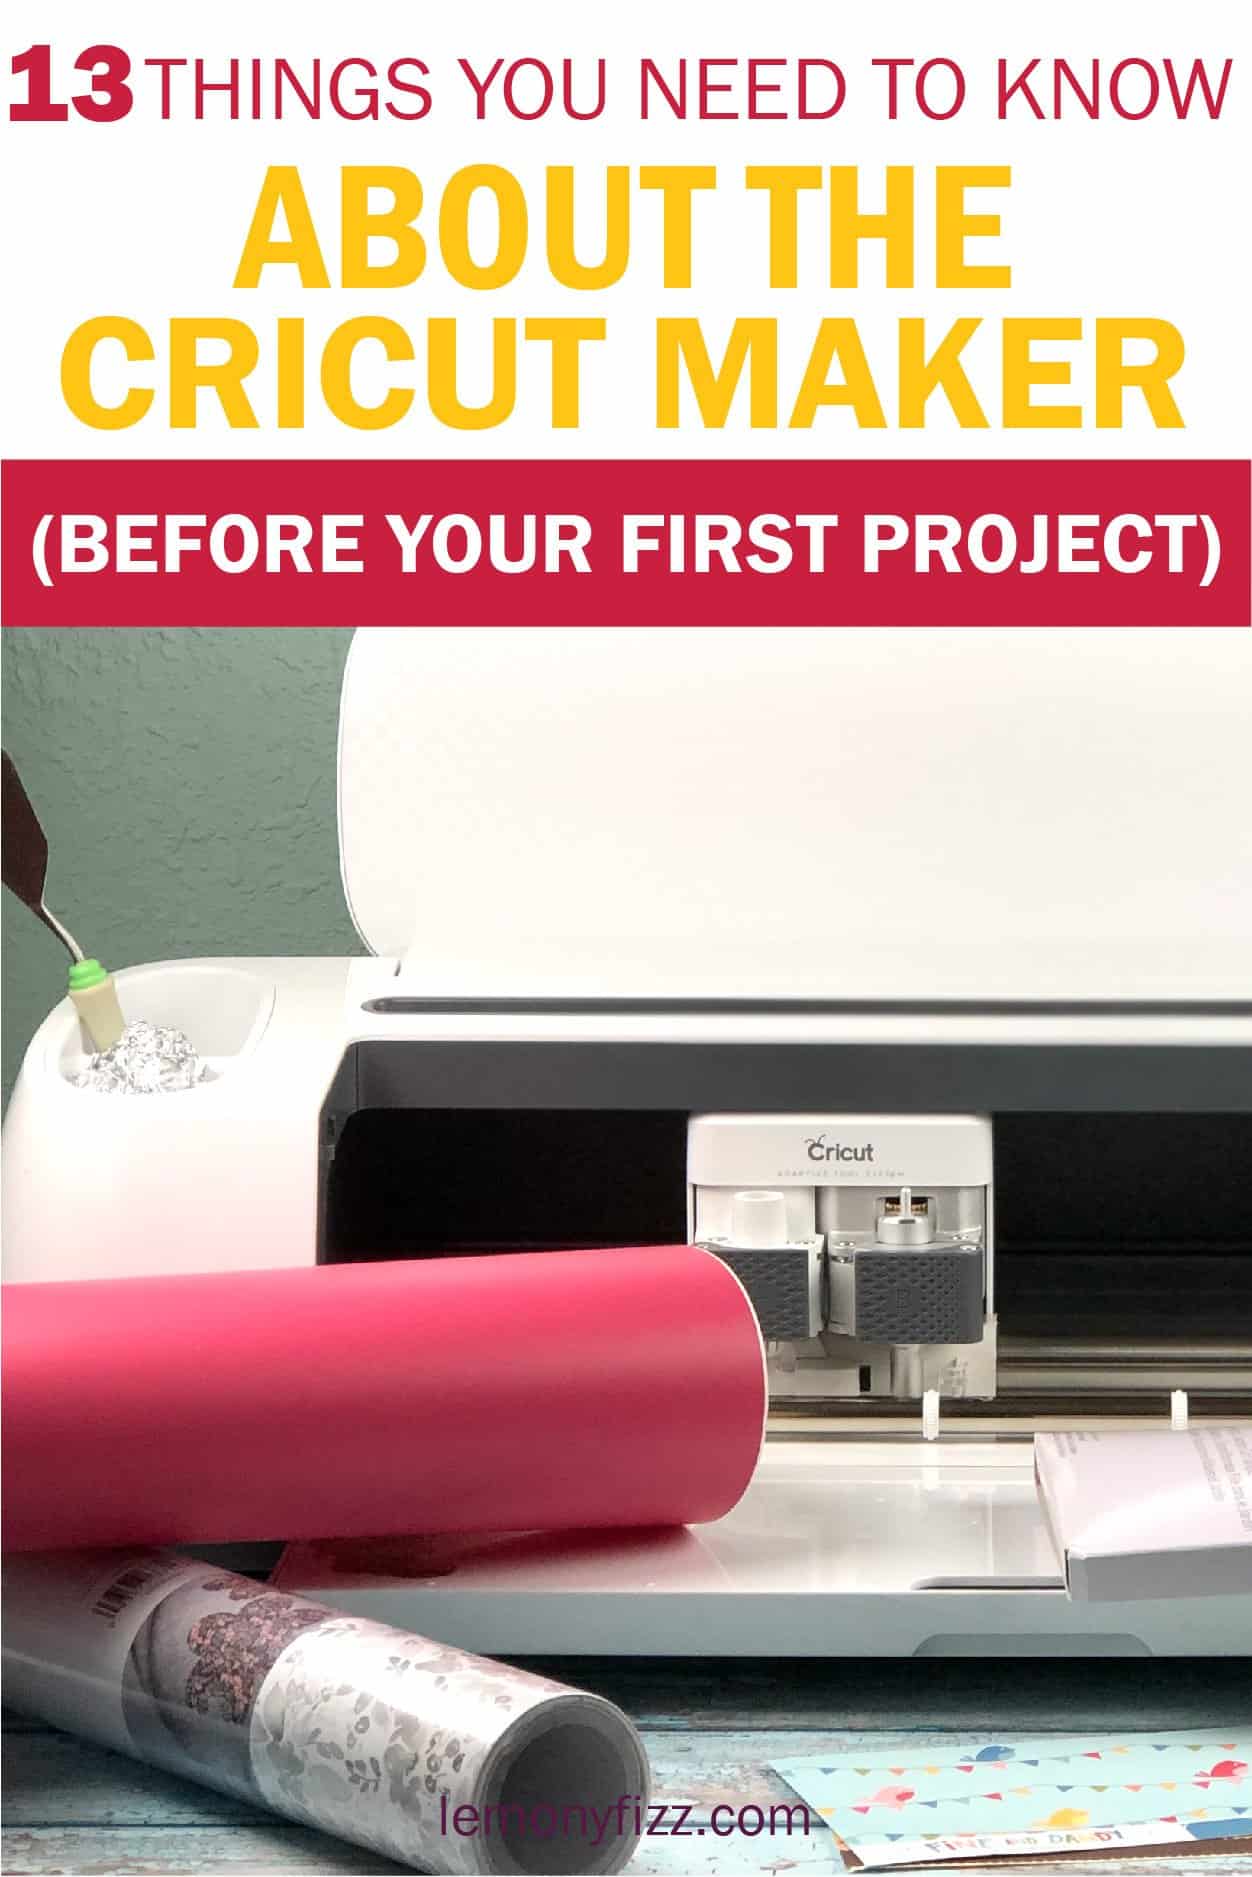 What Can the Cricut Maker Do and Is it Worth the Price?